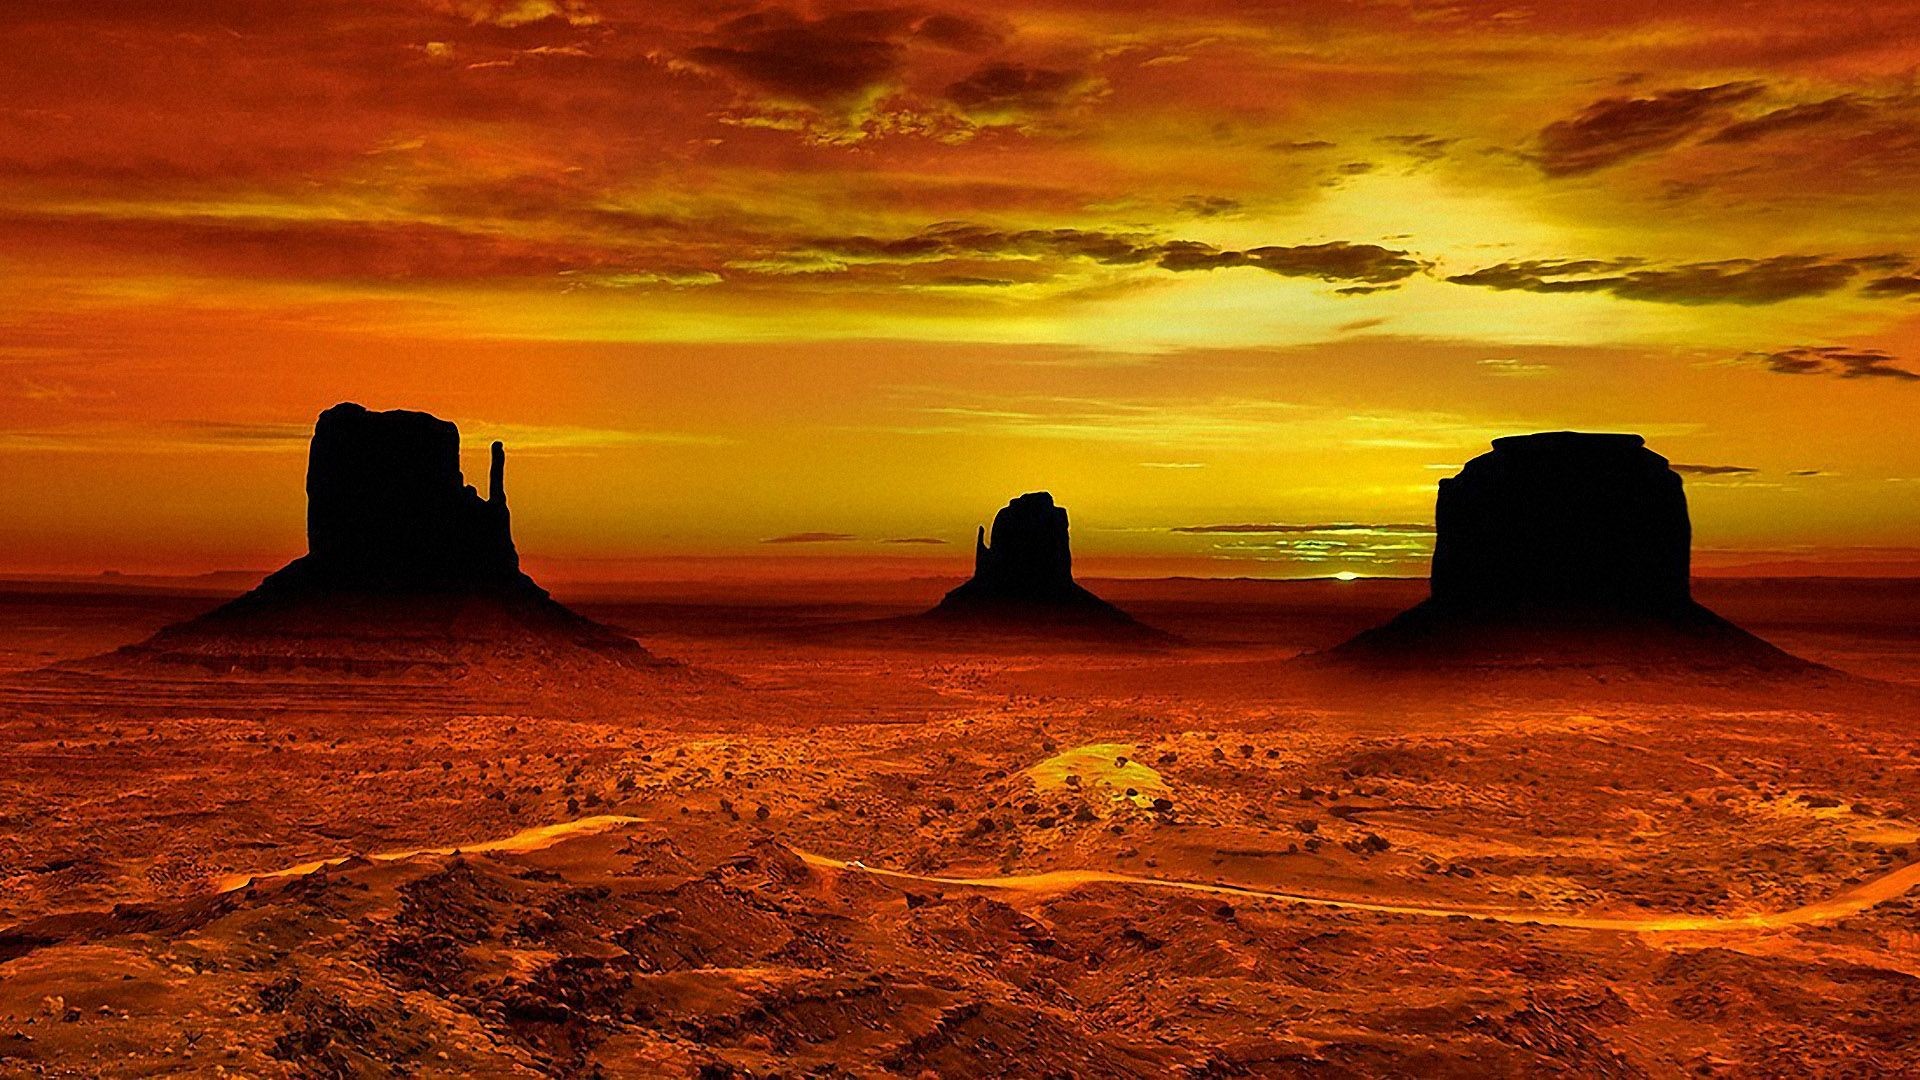 1920x1080 Monument Valley Arizona Wallpaper Wide or HD | Nature Wallpapers